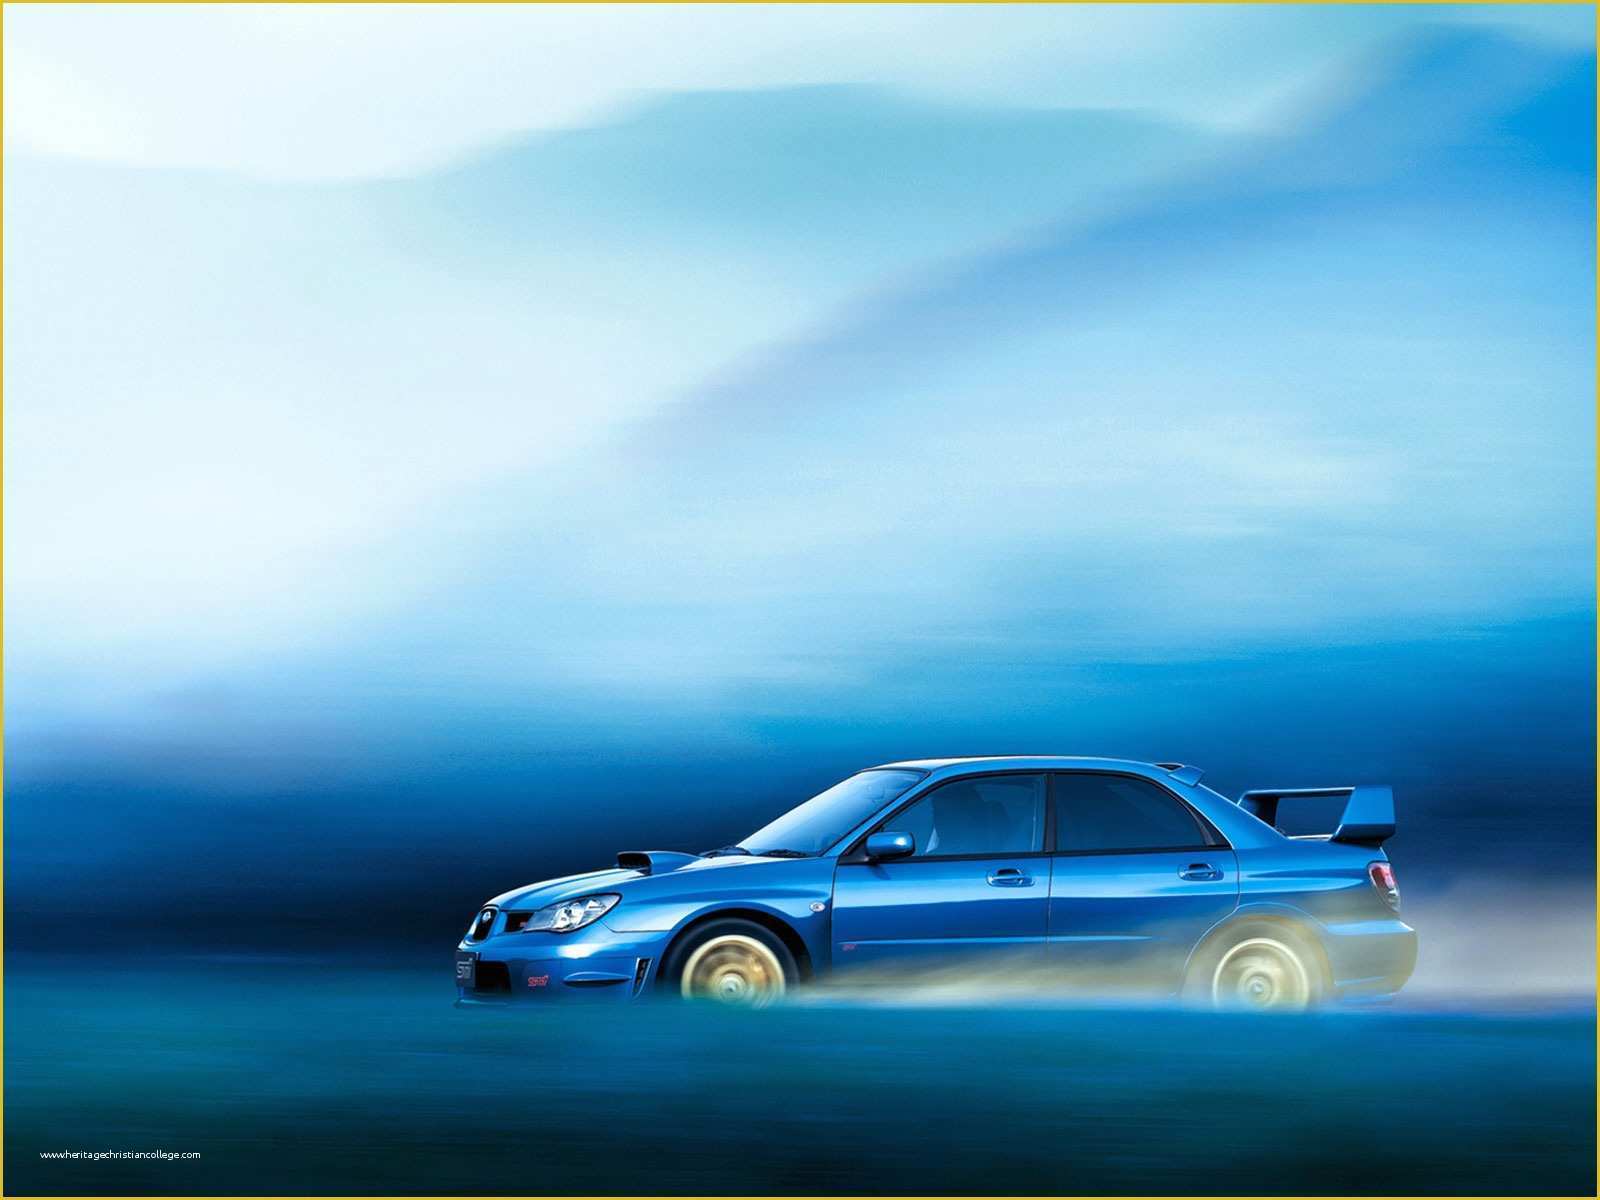 Automotive Powerpoint Templates Free Download Of Collection Of Hd Subaru Wallpapers & Subaru